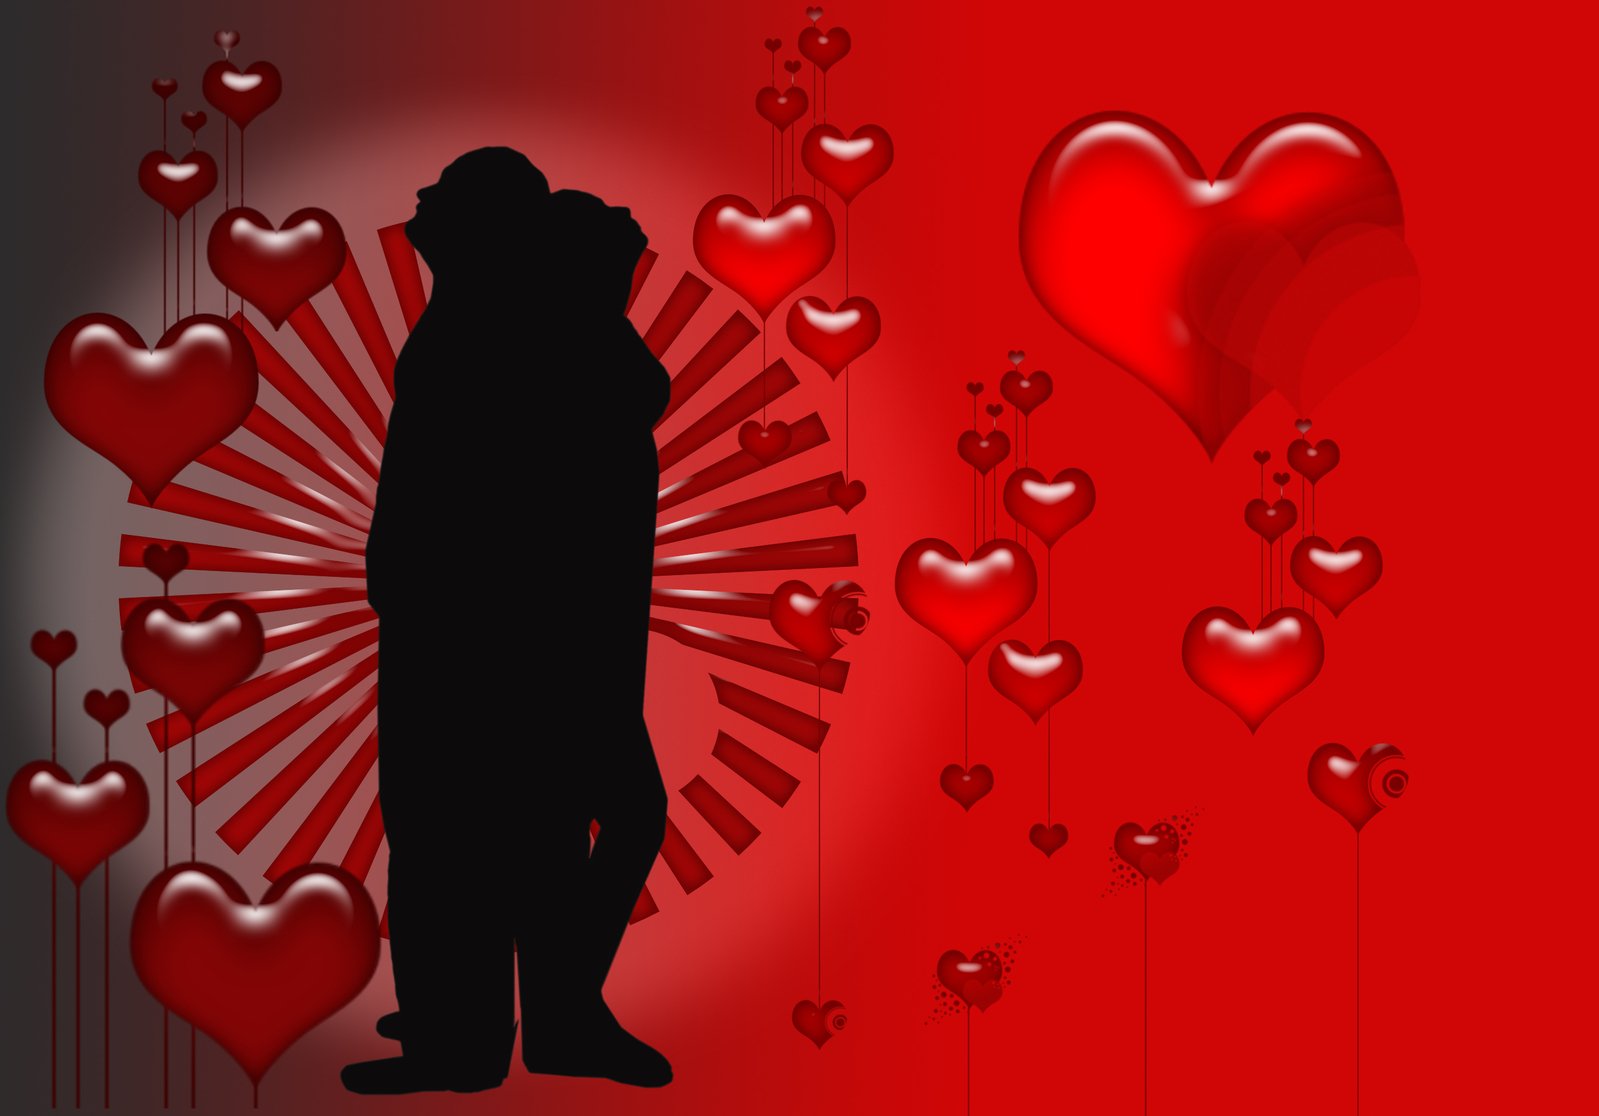 the image has heart shaped shapes surrounding the silhouette of the person